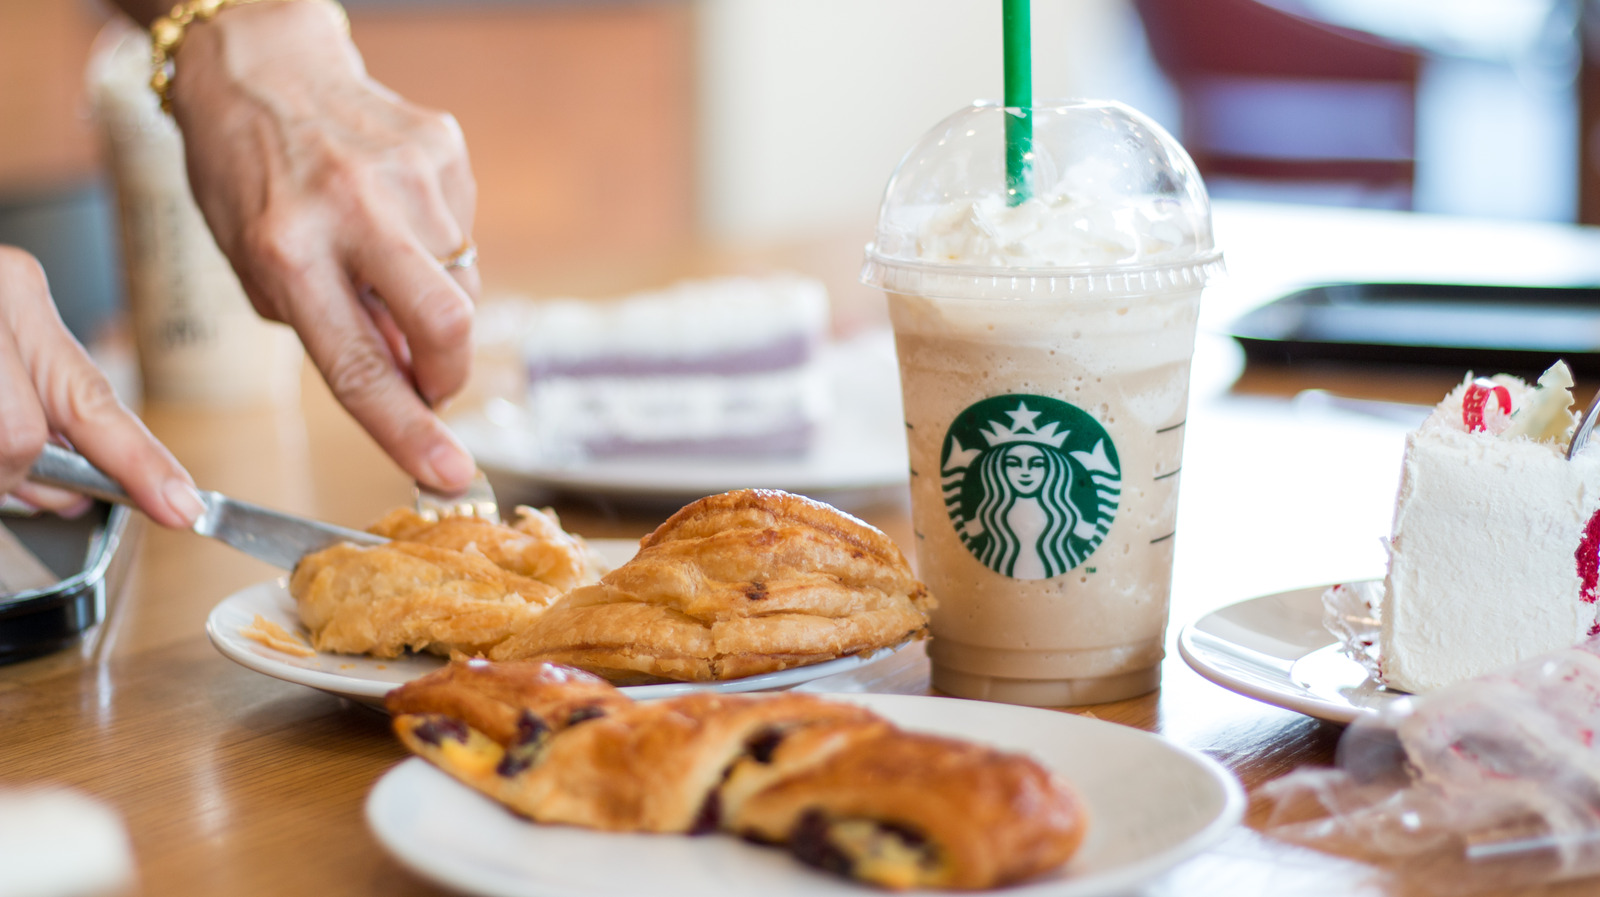 Starbucks Regulars Tell Tasting Table Which Breakfast Item They Think Is Best